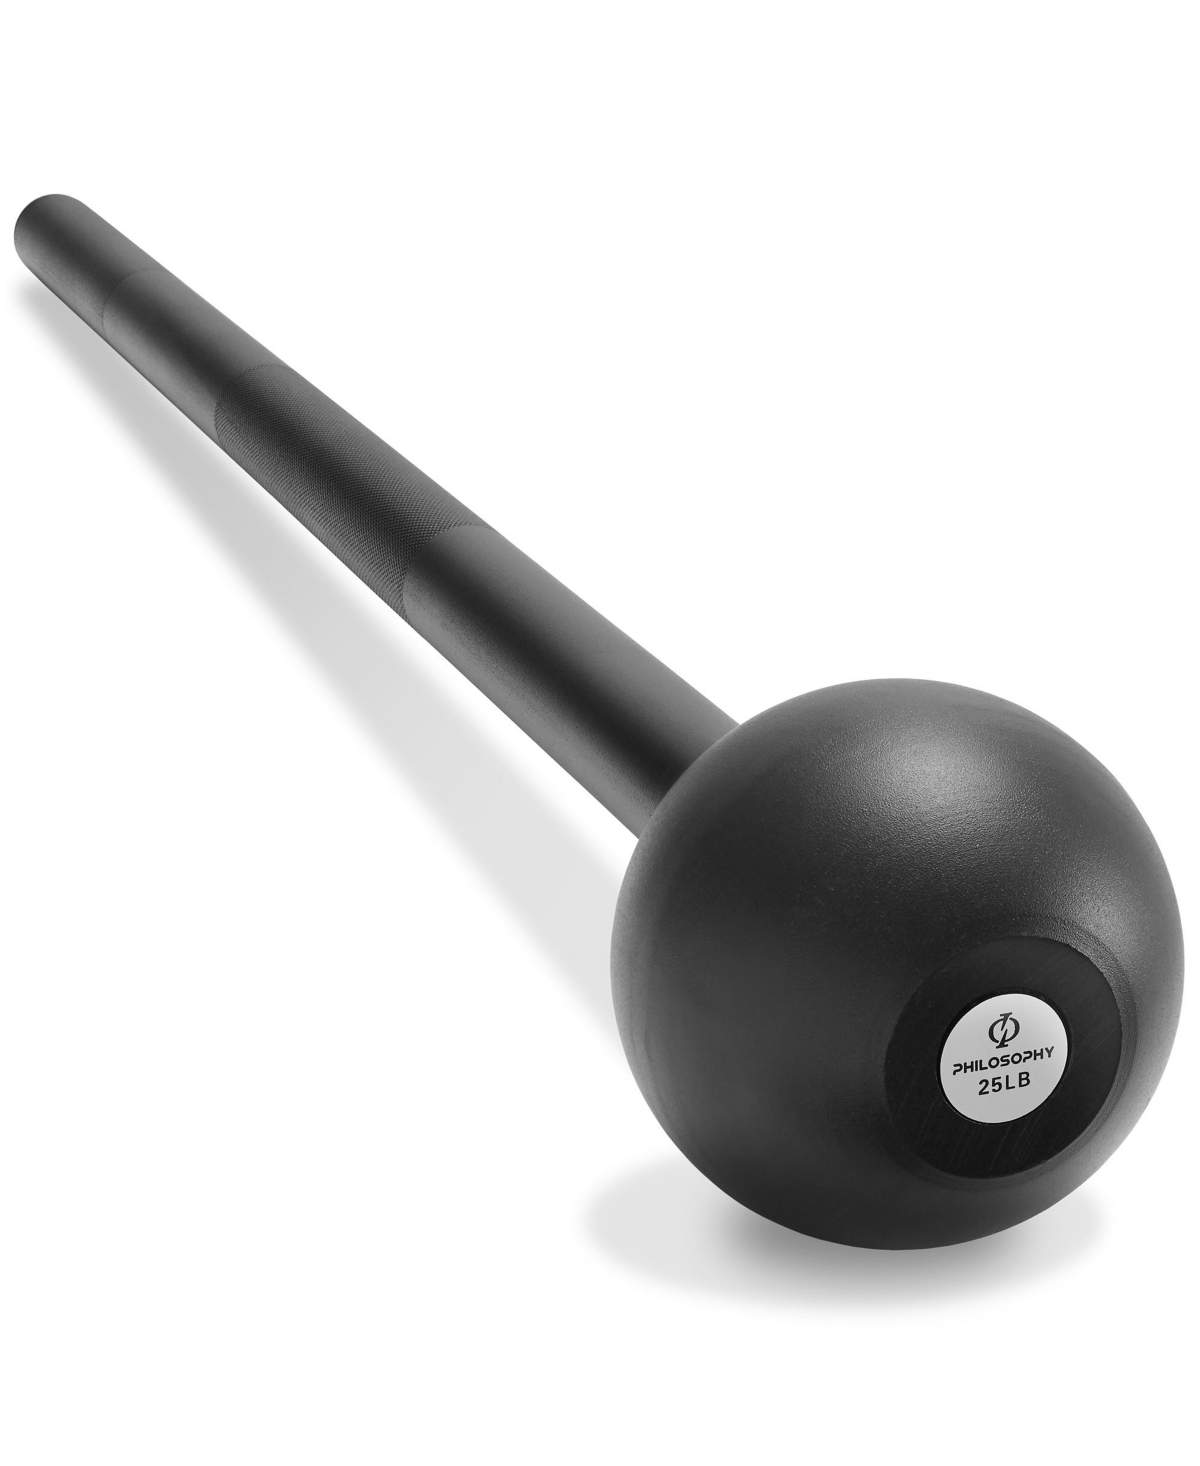 Steel Mace Bell 25 Lb, Mace Club for Strength Training, Functional Full Body Workouts - Black